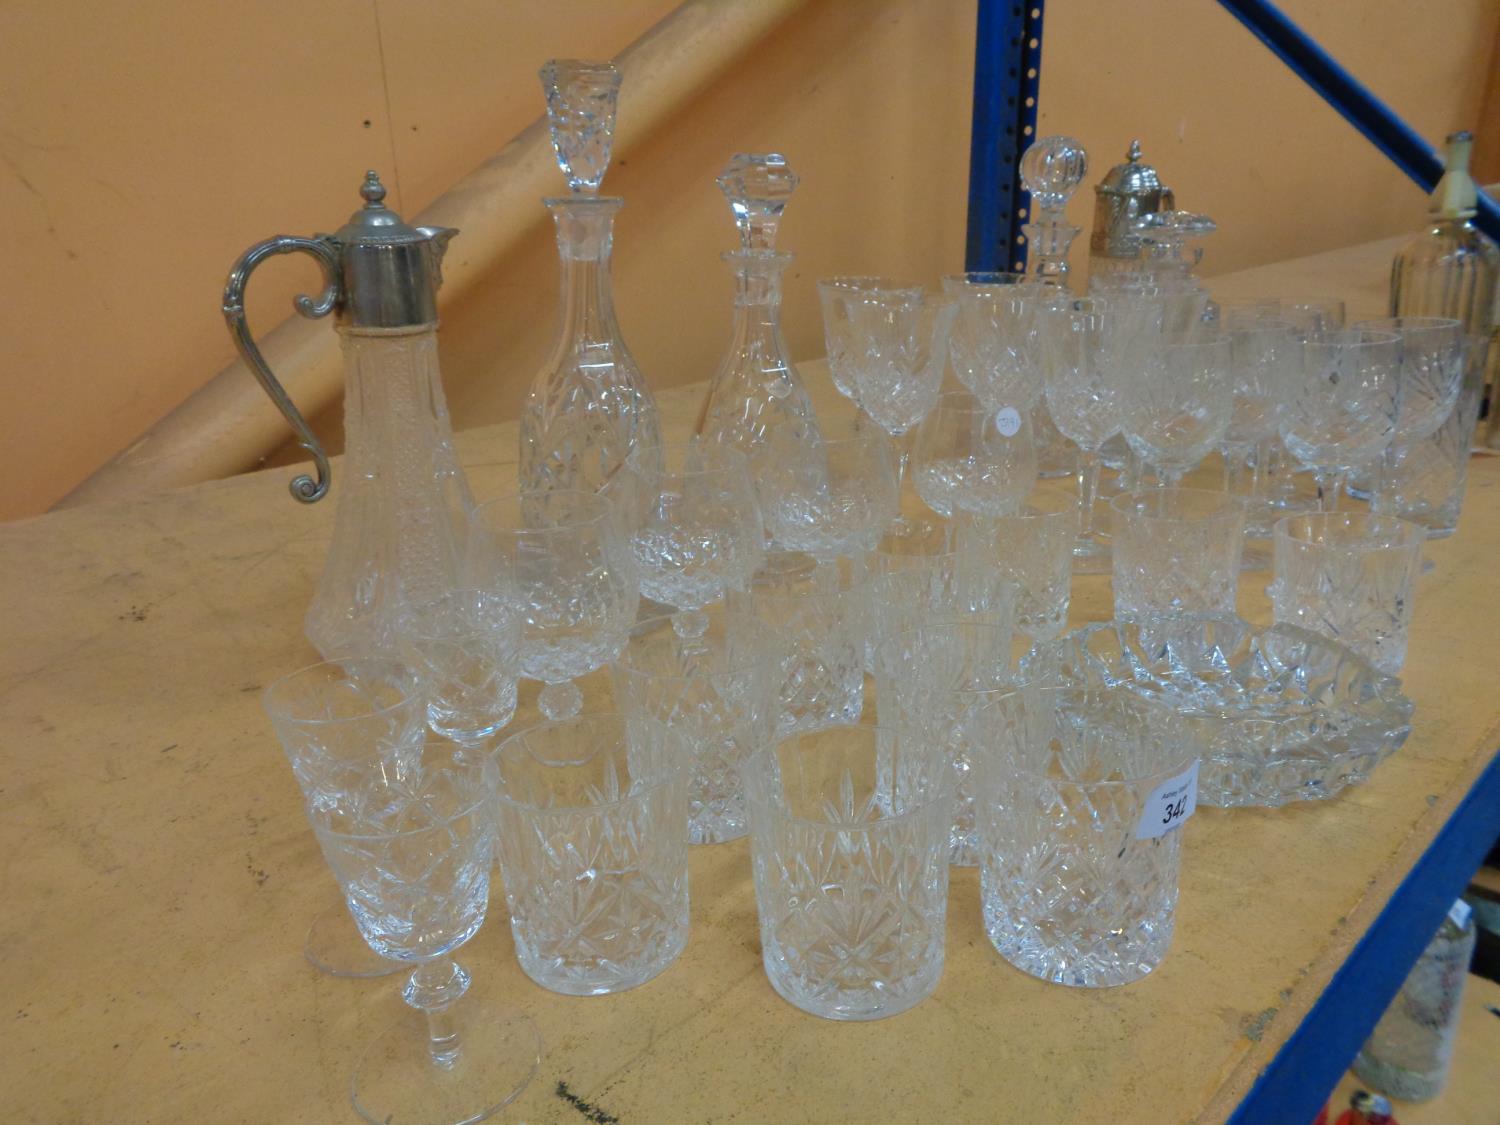 A LARGE COLLECTION OF GLASSWARE INCLUDING DECANTERS AND A VARIETY OF DRINKS GLASSES - Bild 3 aus 8